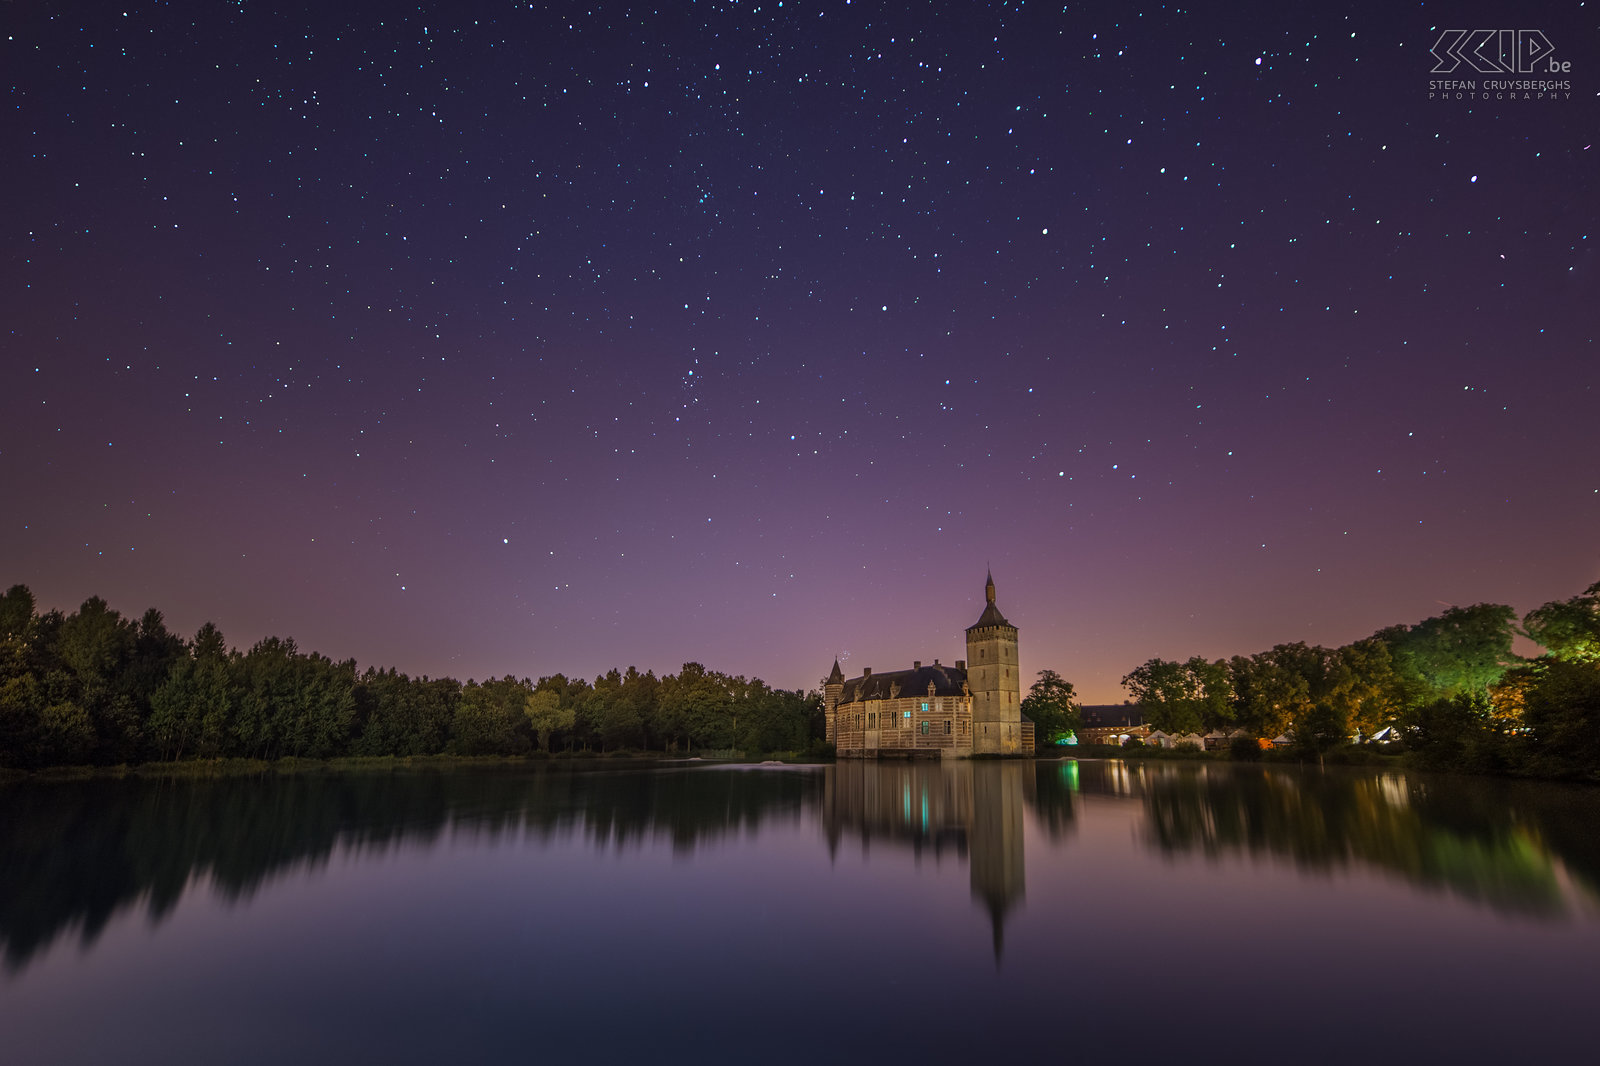 Sint-Pieters-Rode - Castle of Horst with starry sky The castle of Horst with a beautiful starry sky in August. The castle of Horst was built in the mid-14th century and is still quite authentic.  Stefan Cruysberghs